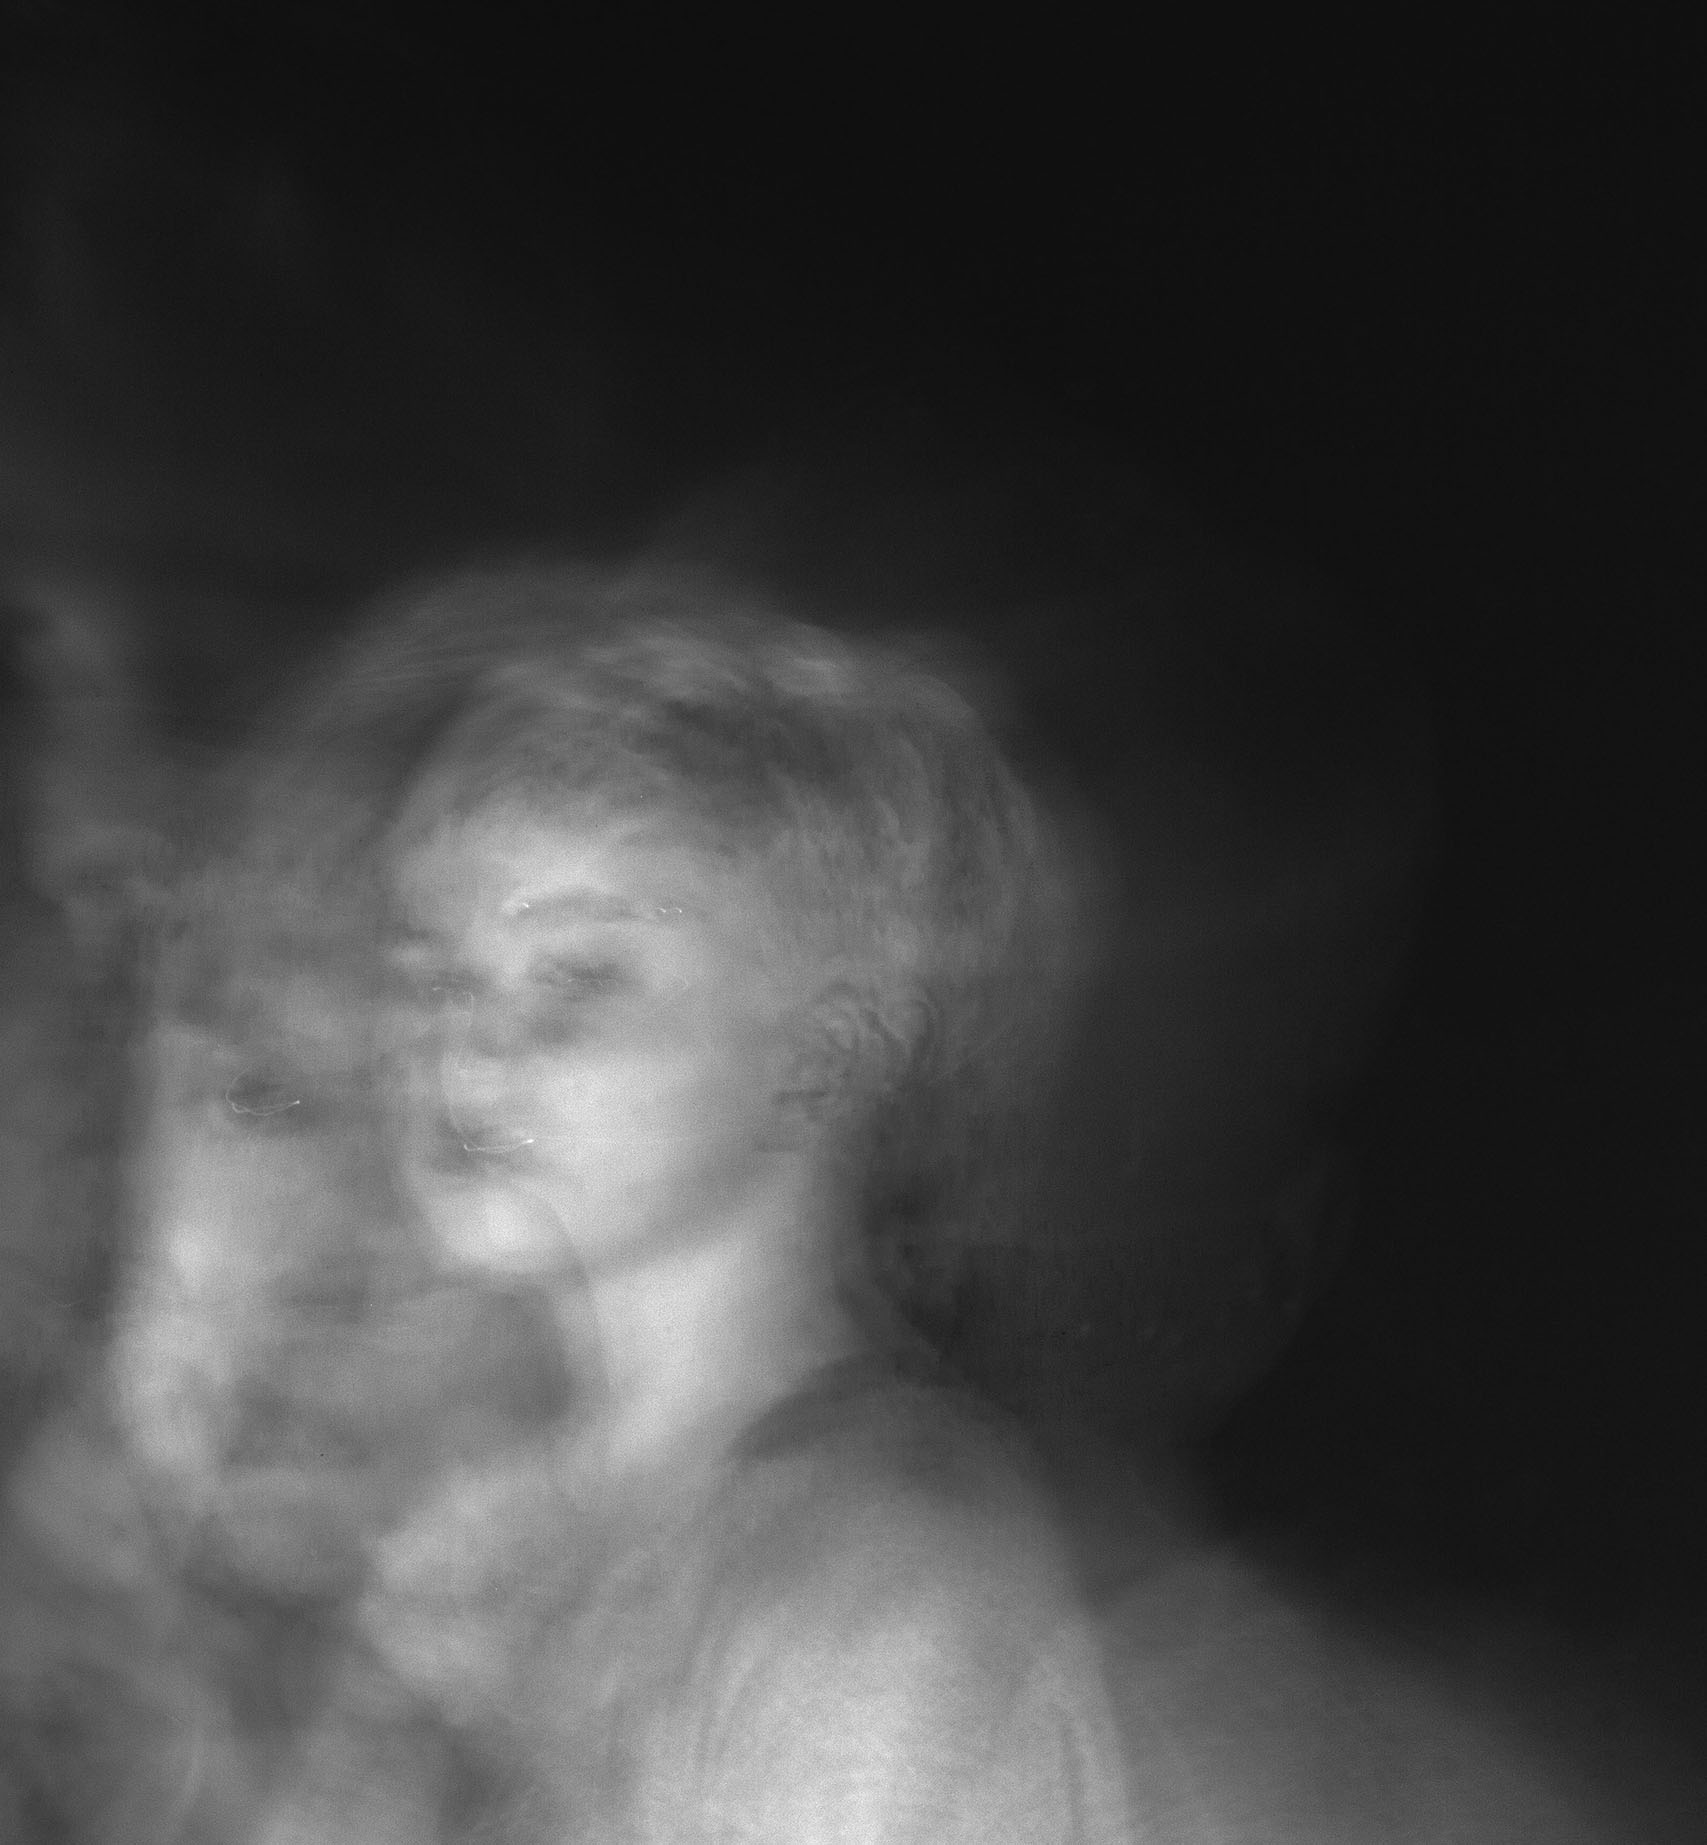 Ghostly portait photographed by Arlo Haseman.